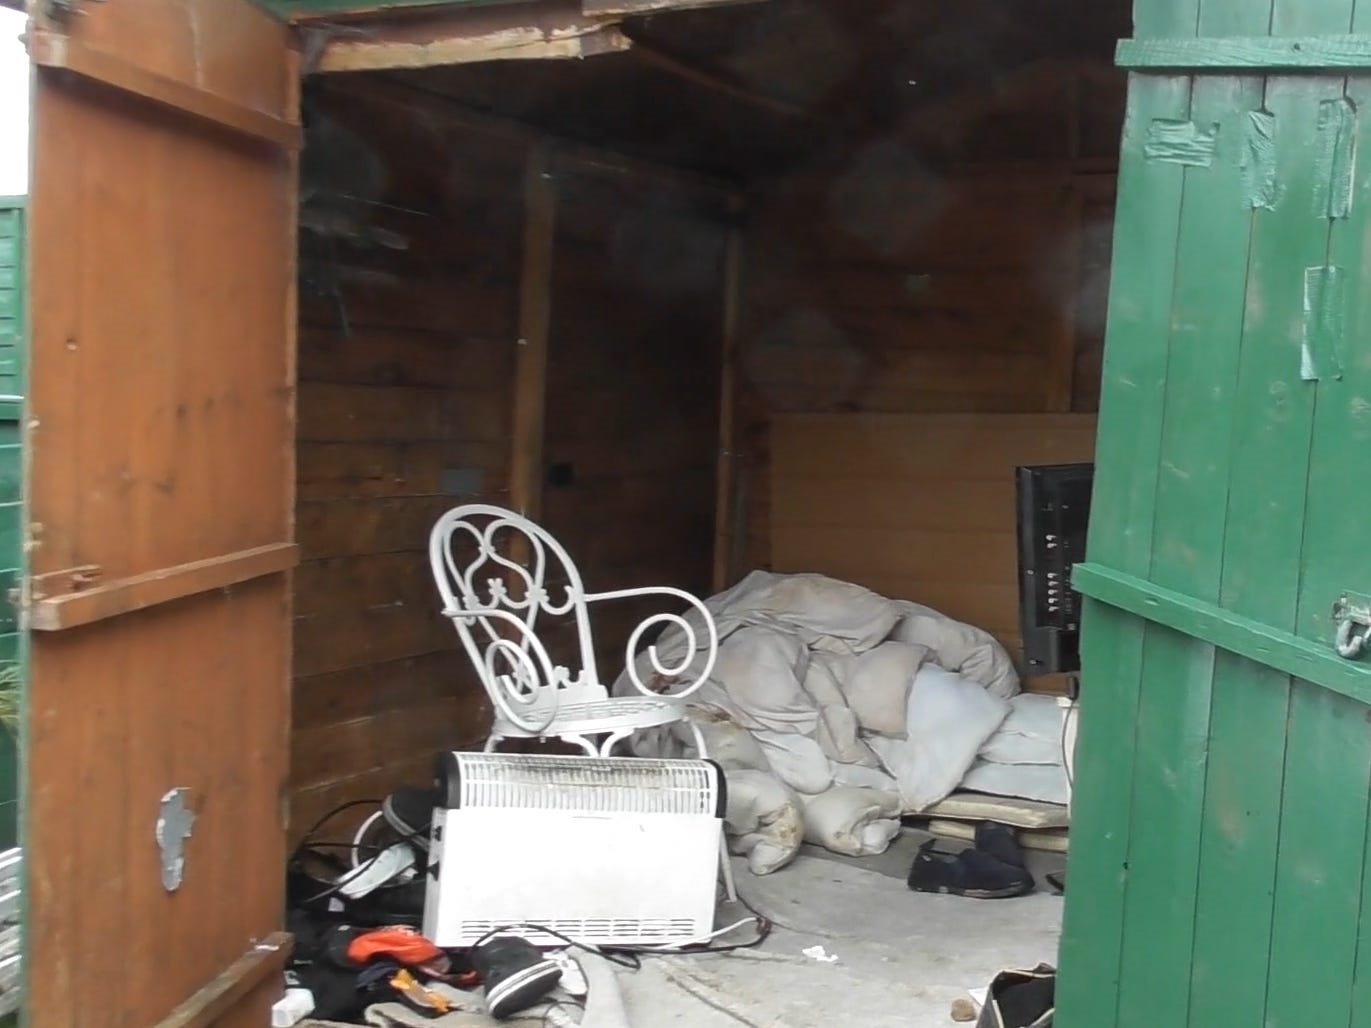 This is the shed that Peter Swailes, 56, kept a worker in for some 40 years. Investigating officers from the UK authorities found a soiled duvet and no working source of light or heating in the shed, noting that the family's dog had far better living quarters. GLAA/Vimeo